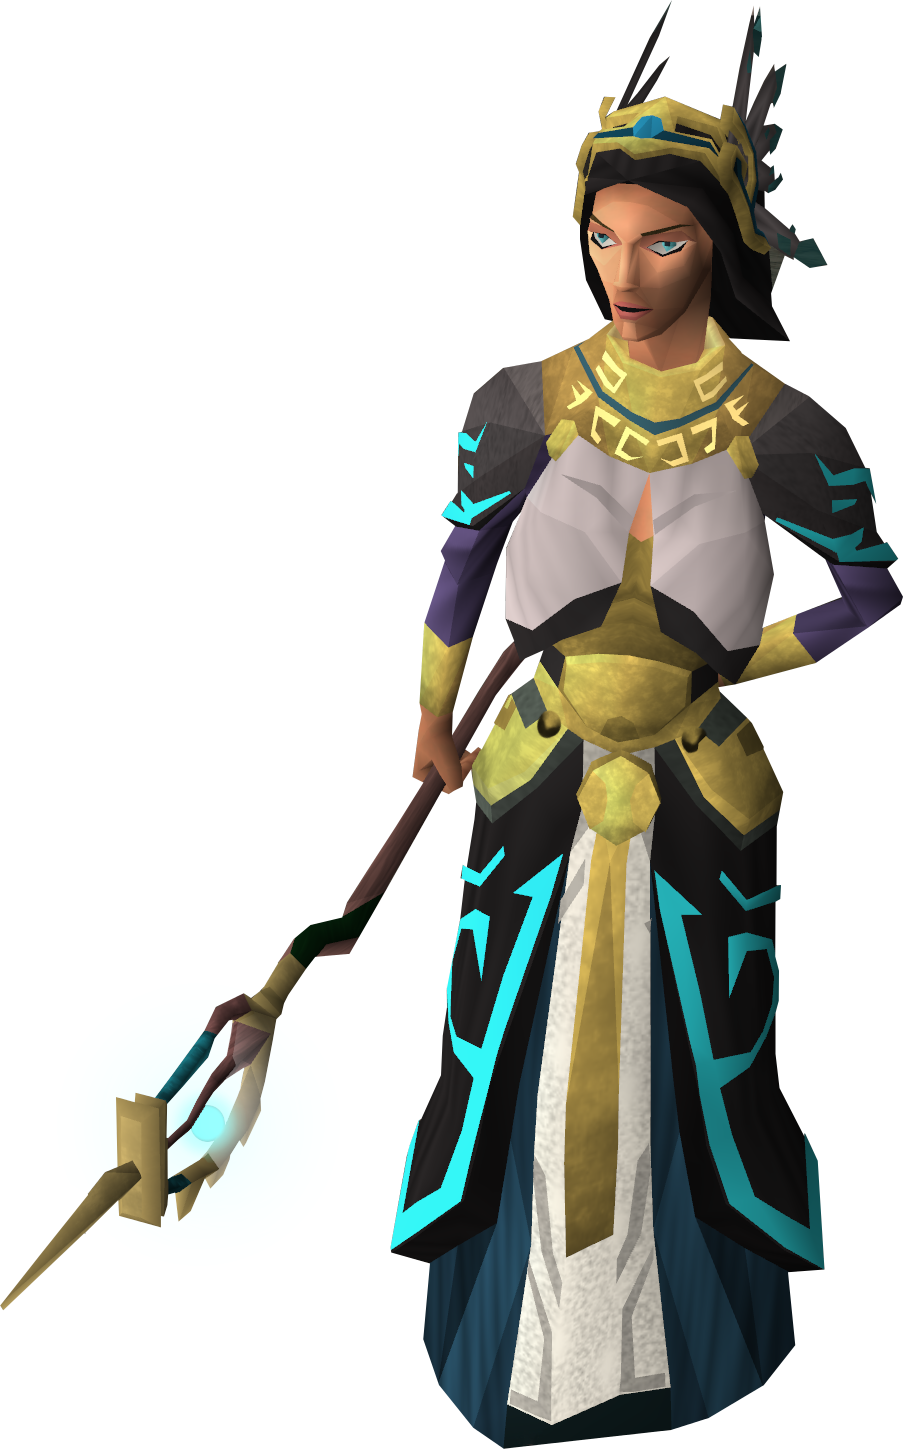 New Foundations - The RuneScape Wiki